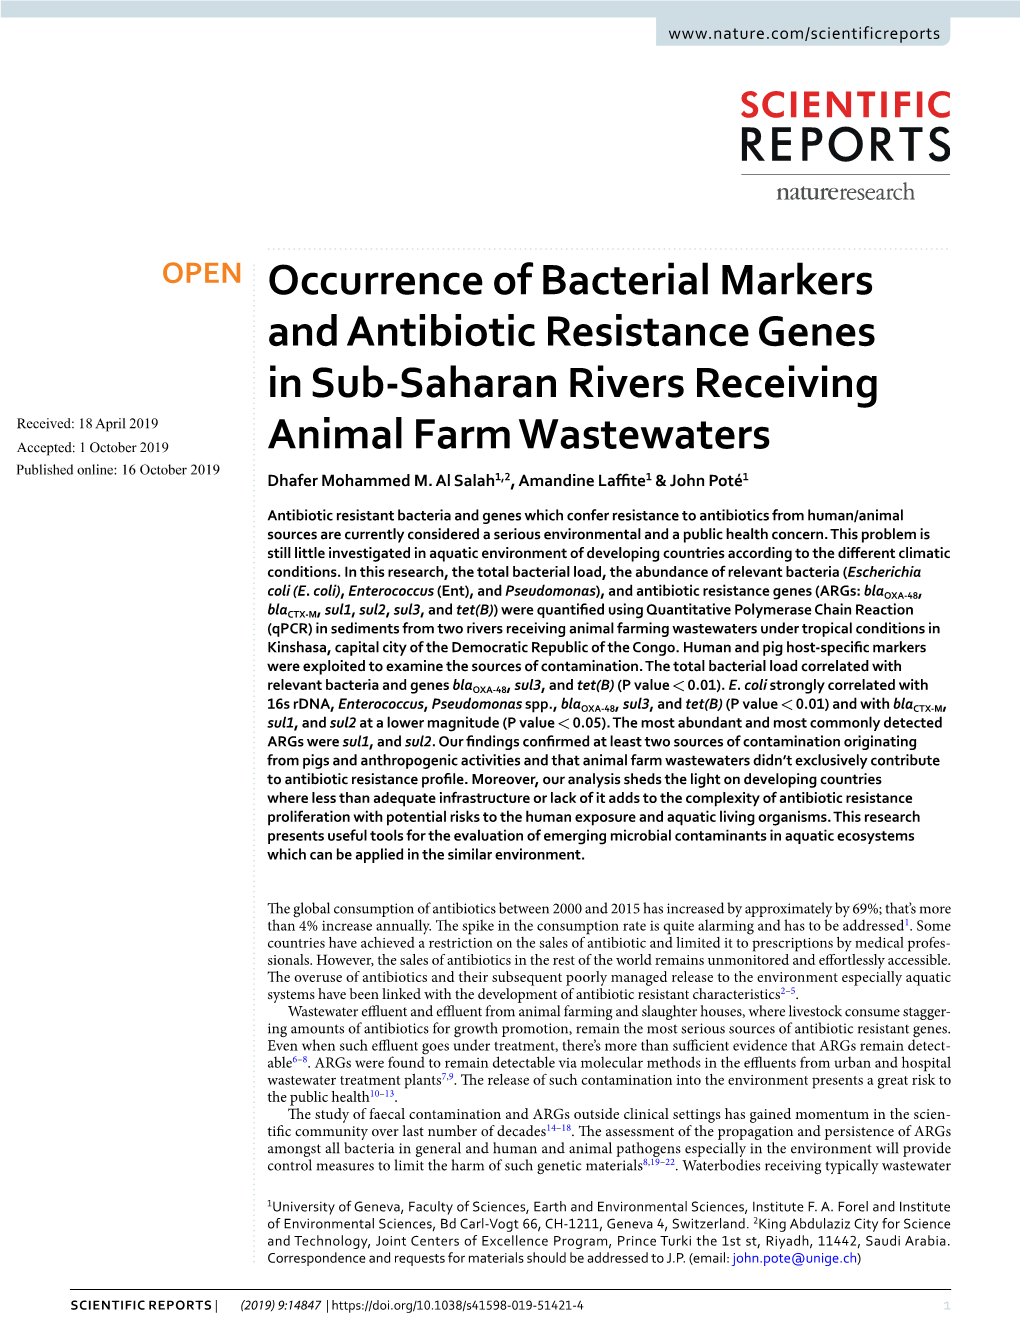 Occurrence of Bacterial Markers and Antibiotic Resistance Genes in Sub